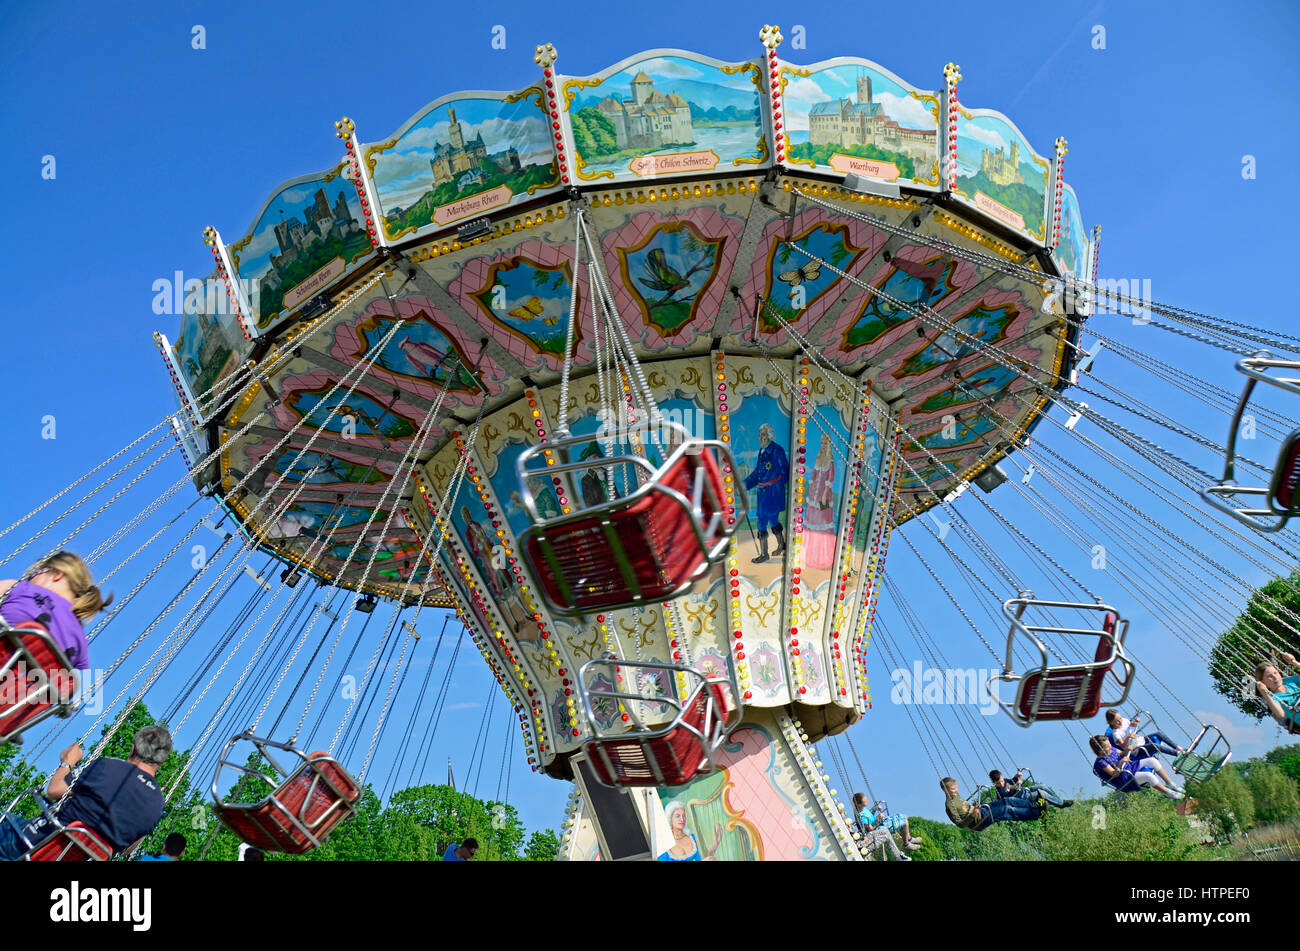 Amusement with a old carousel on festival 'Baumblütenfest' Werder (Havel) Brandenburg, Germany, Europe Stock Photo